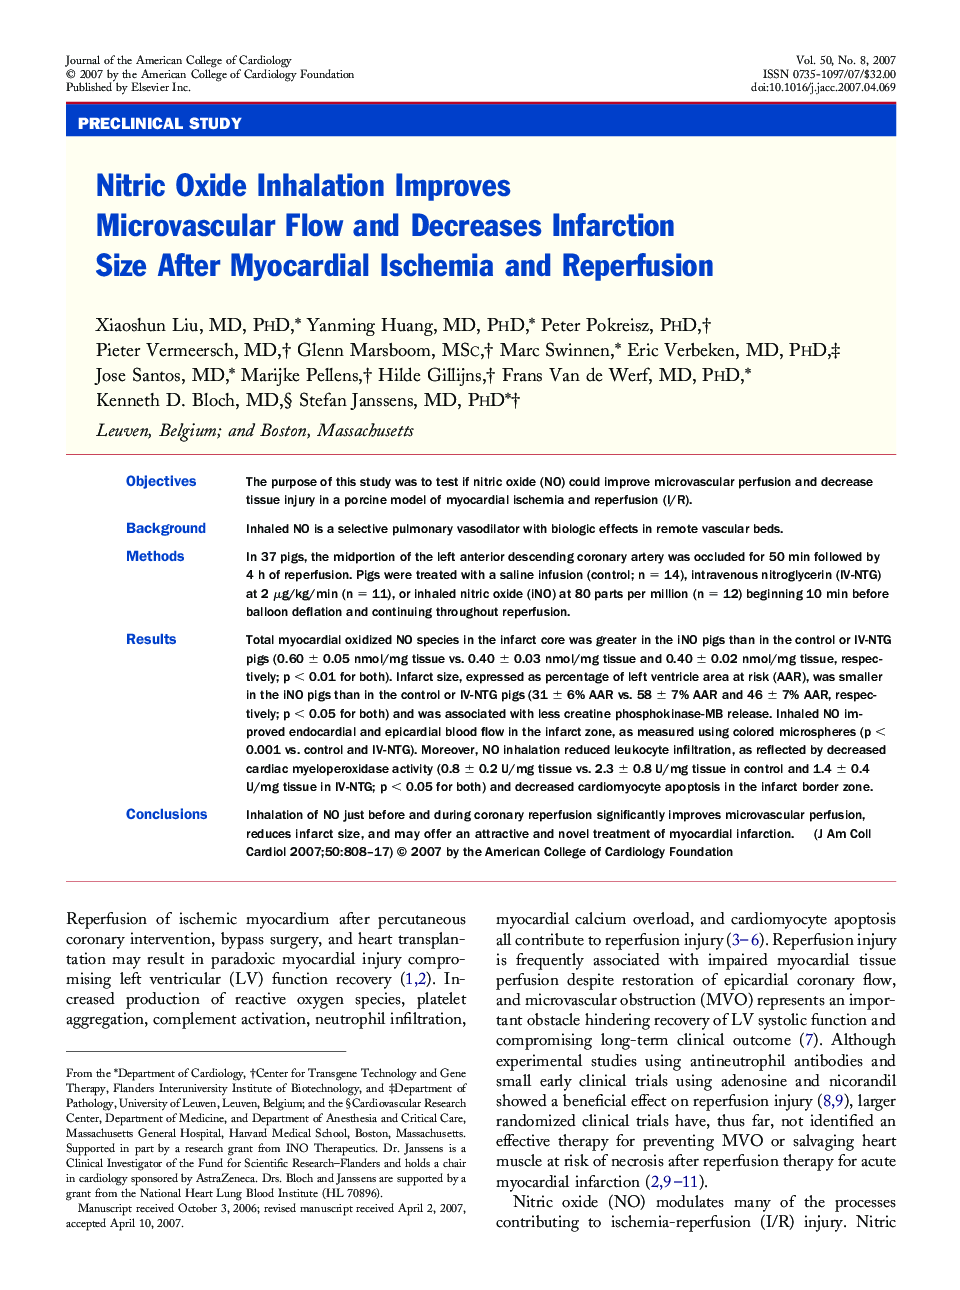 Nitric Oxide Inhalation Improves Microvascular Flow and Decreases Infarction Size After Myocardial Ischemia and Reperfusion 